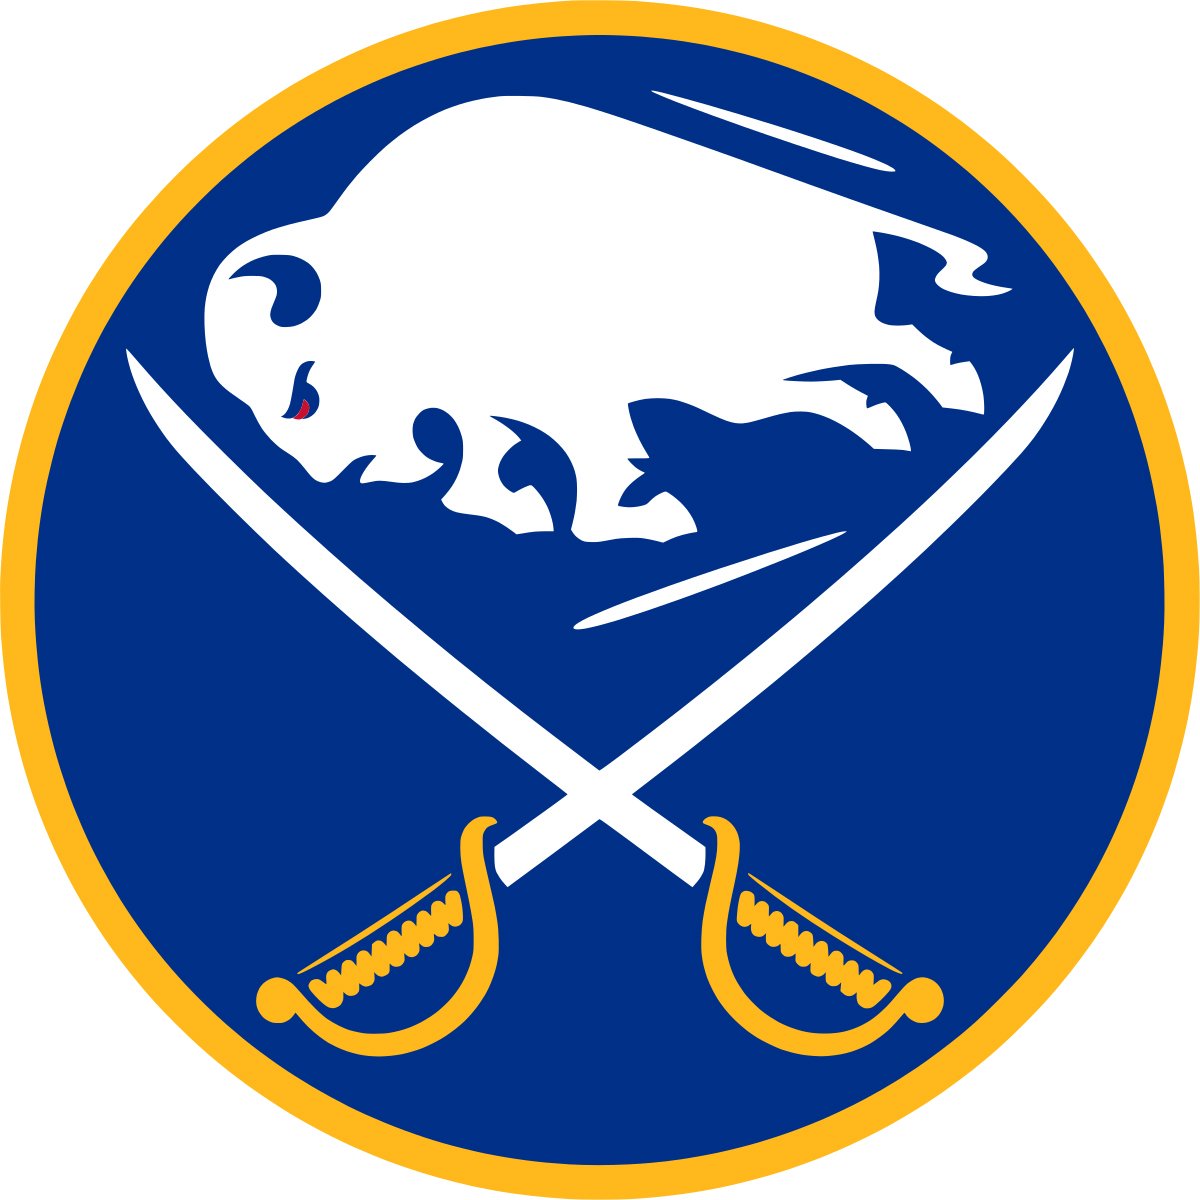 buffalo sabres jersey numbers